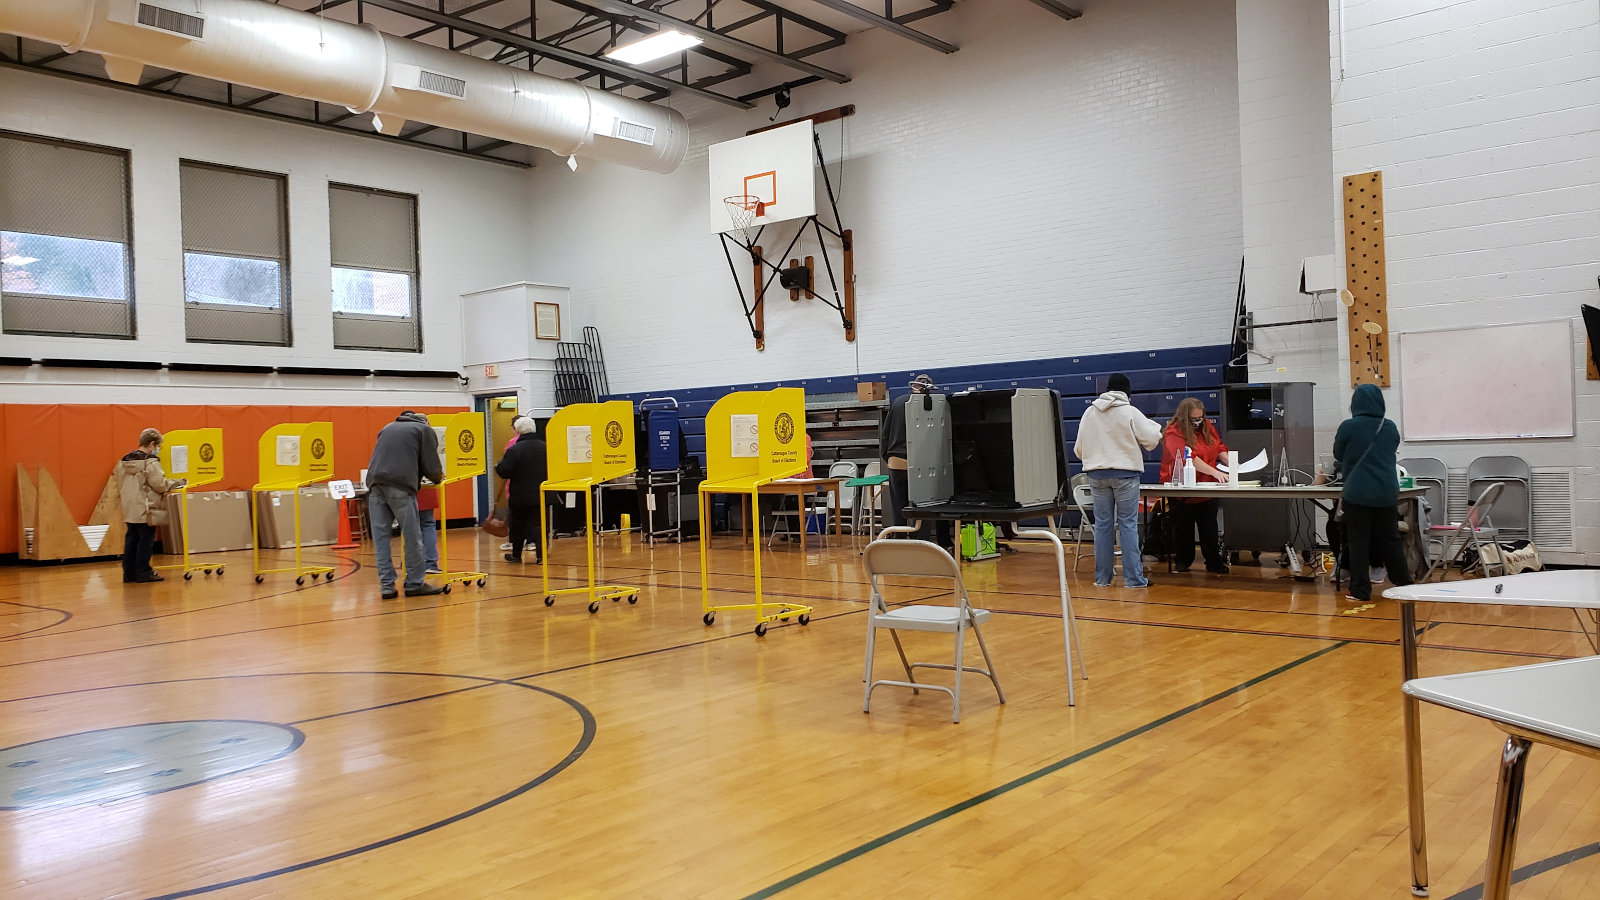 Early voting in Little Valley, NY on Oct 24, 2020